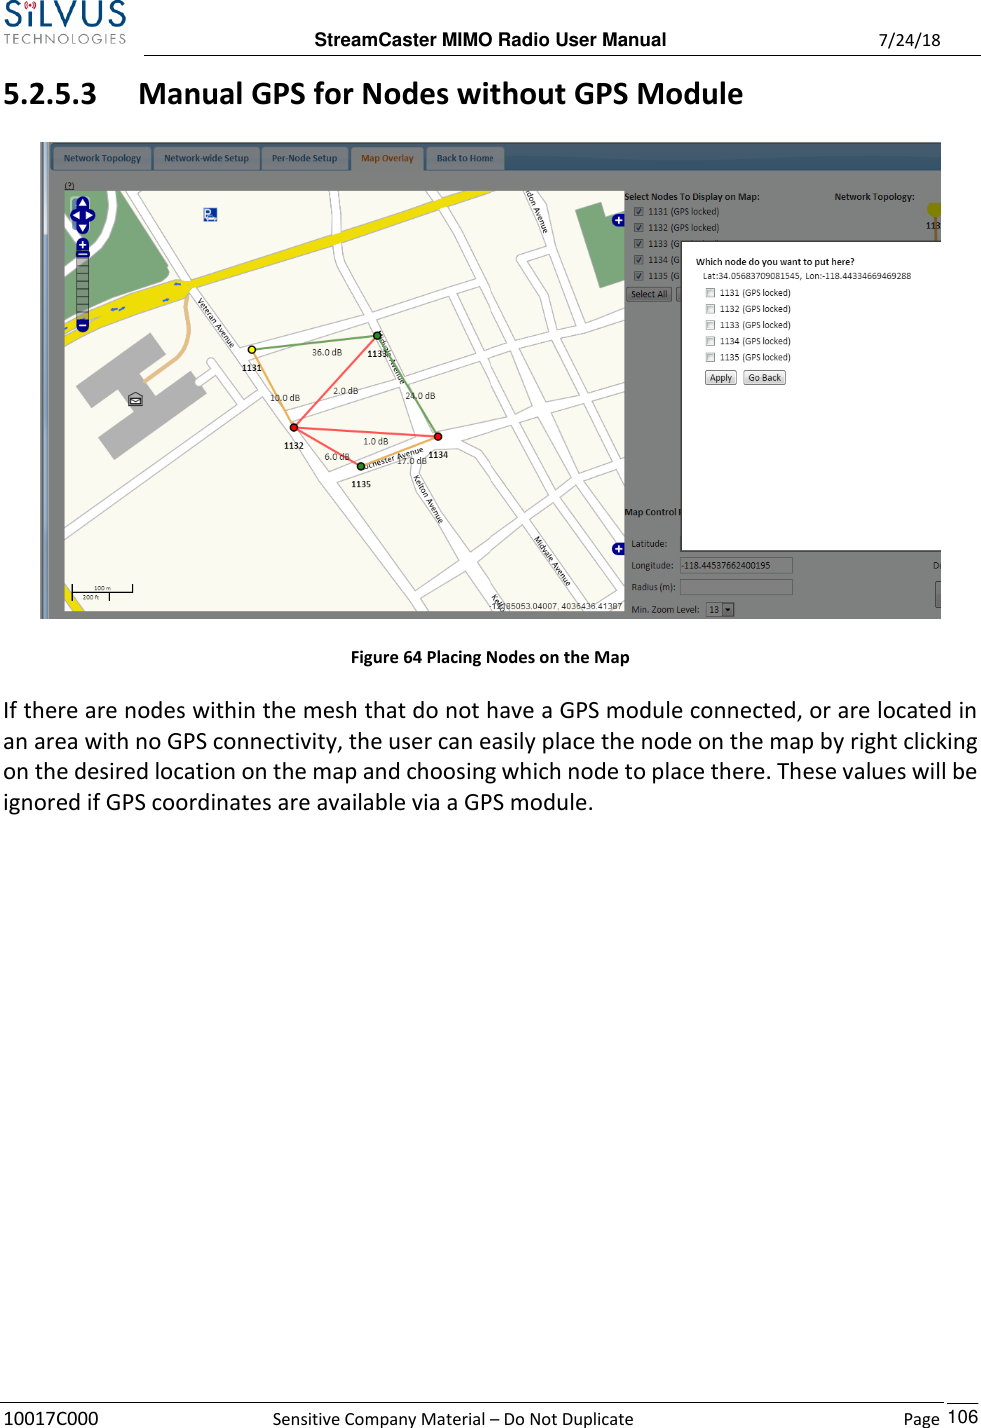  StreamCaster MIMO Radio User Manual  7/24/18 10017C000  Sensitive Company Material – Do Not Duplicate    Page    106 5.2.5.3 Manual GPS for Nodes without GPS Module  Figure 64 Placing Nodes on the Map If there are nodes within the mesh that do not have a GPS module connected, or are located in an area with no GPS connectivity, the user can easily place the node on the map by right clicking on the desired location on the map and choosing which node to place there. These values will be ignored if GPS coordinates are available via a GPS module.     